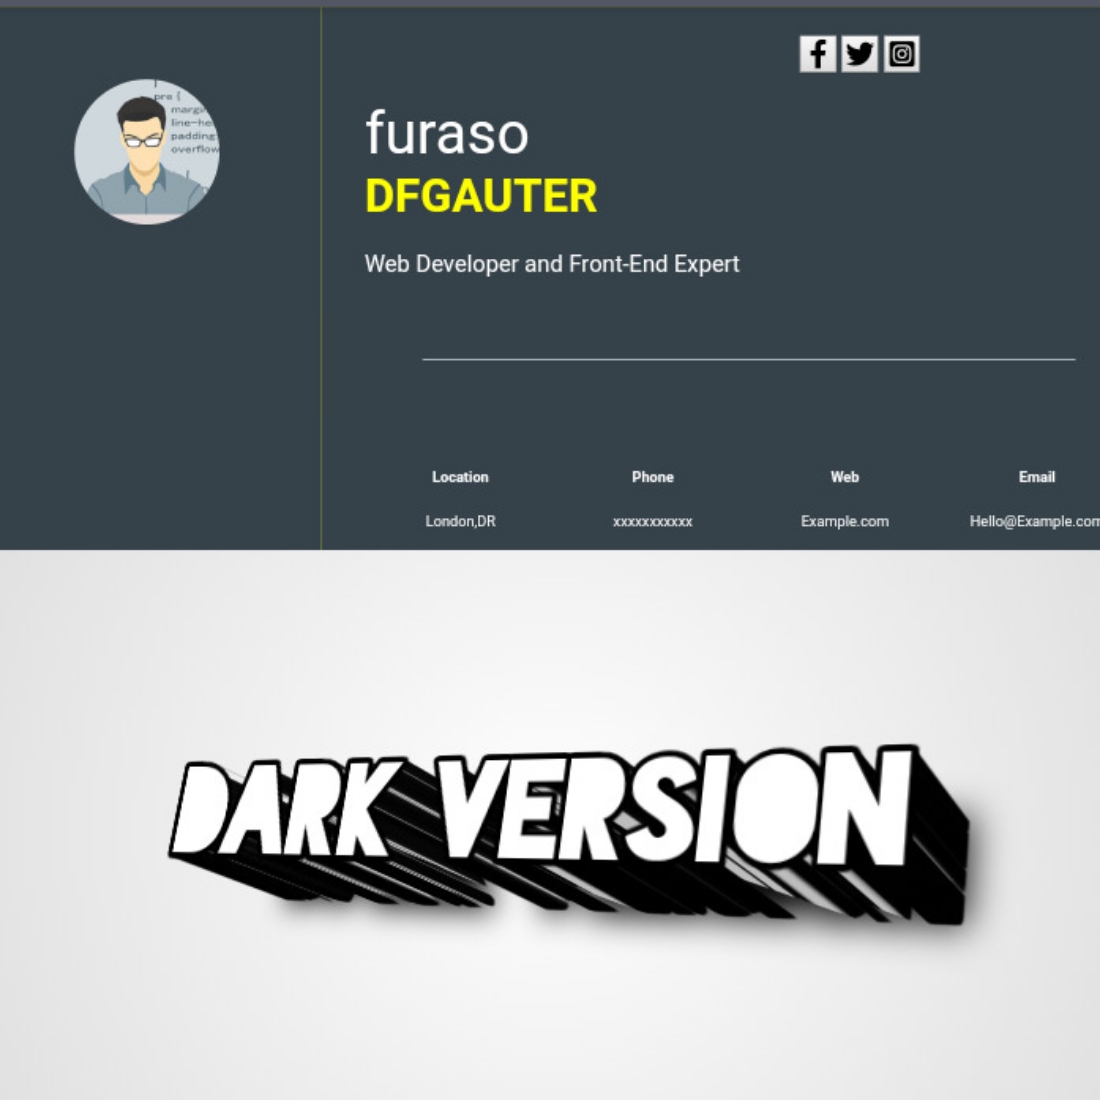 Furaso Dfgauter Single Page Layout Html and CSS CV/Resume Template cover image.